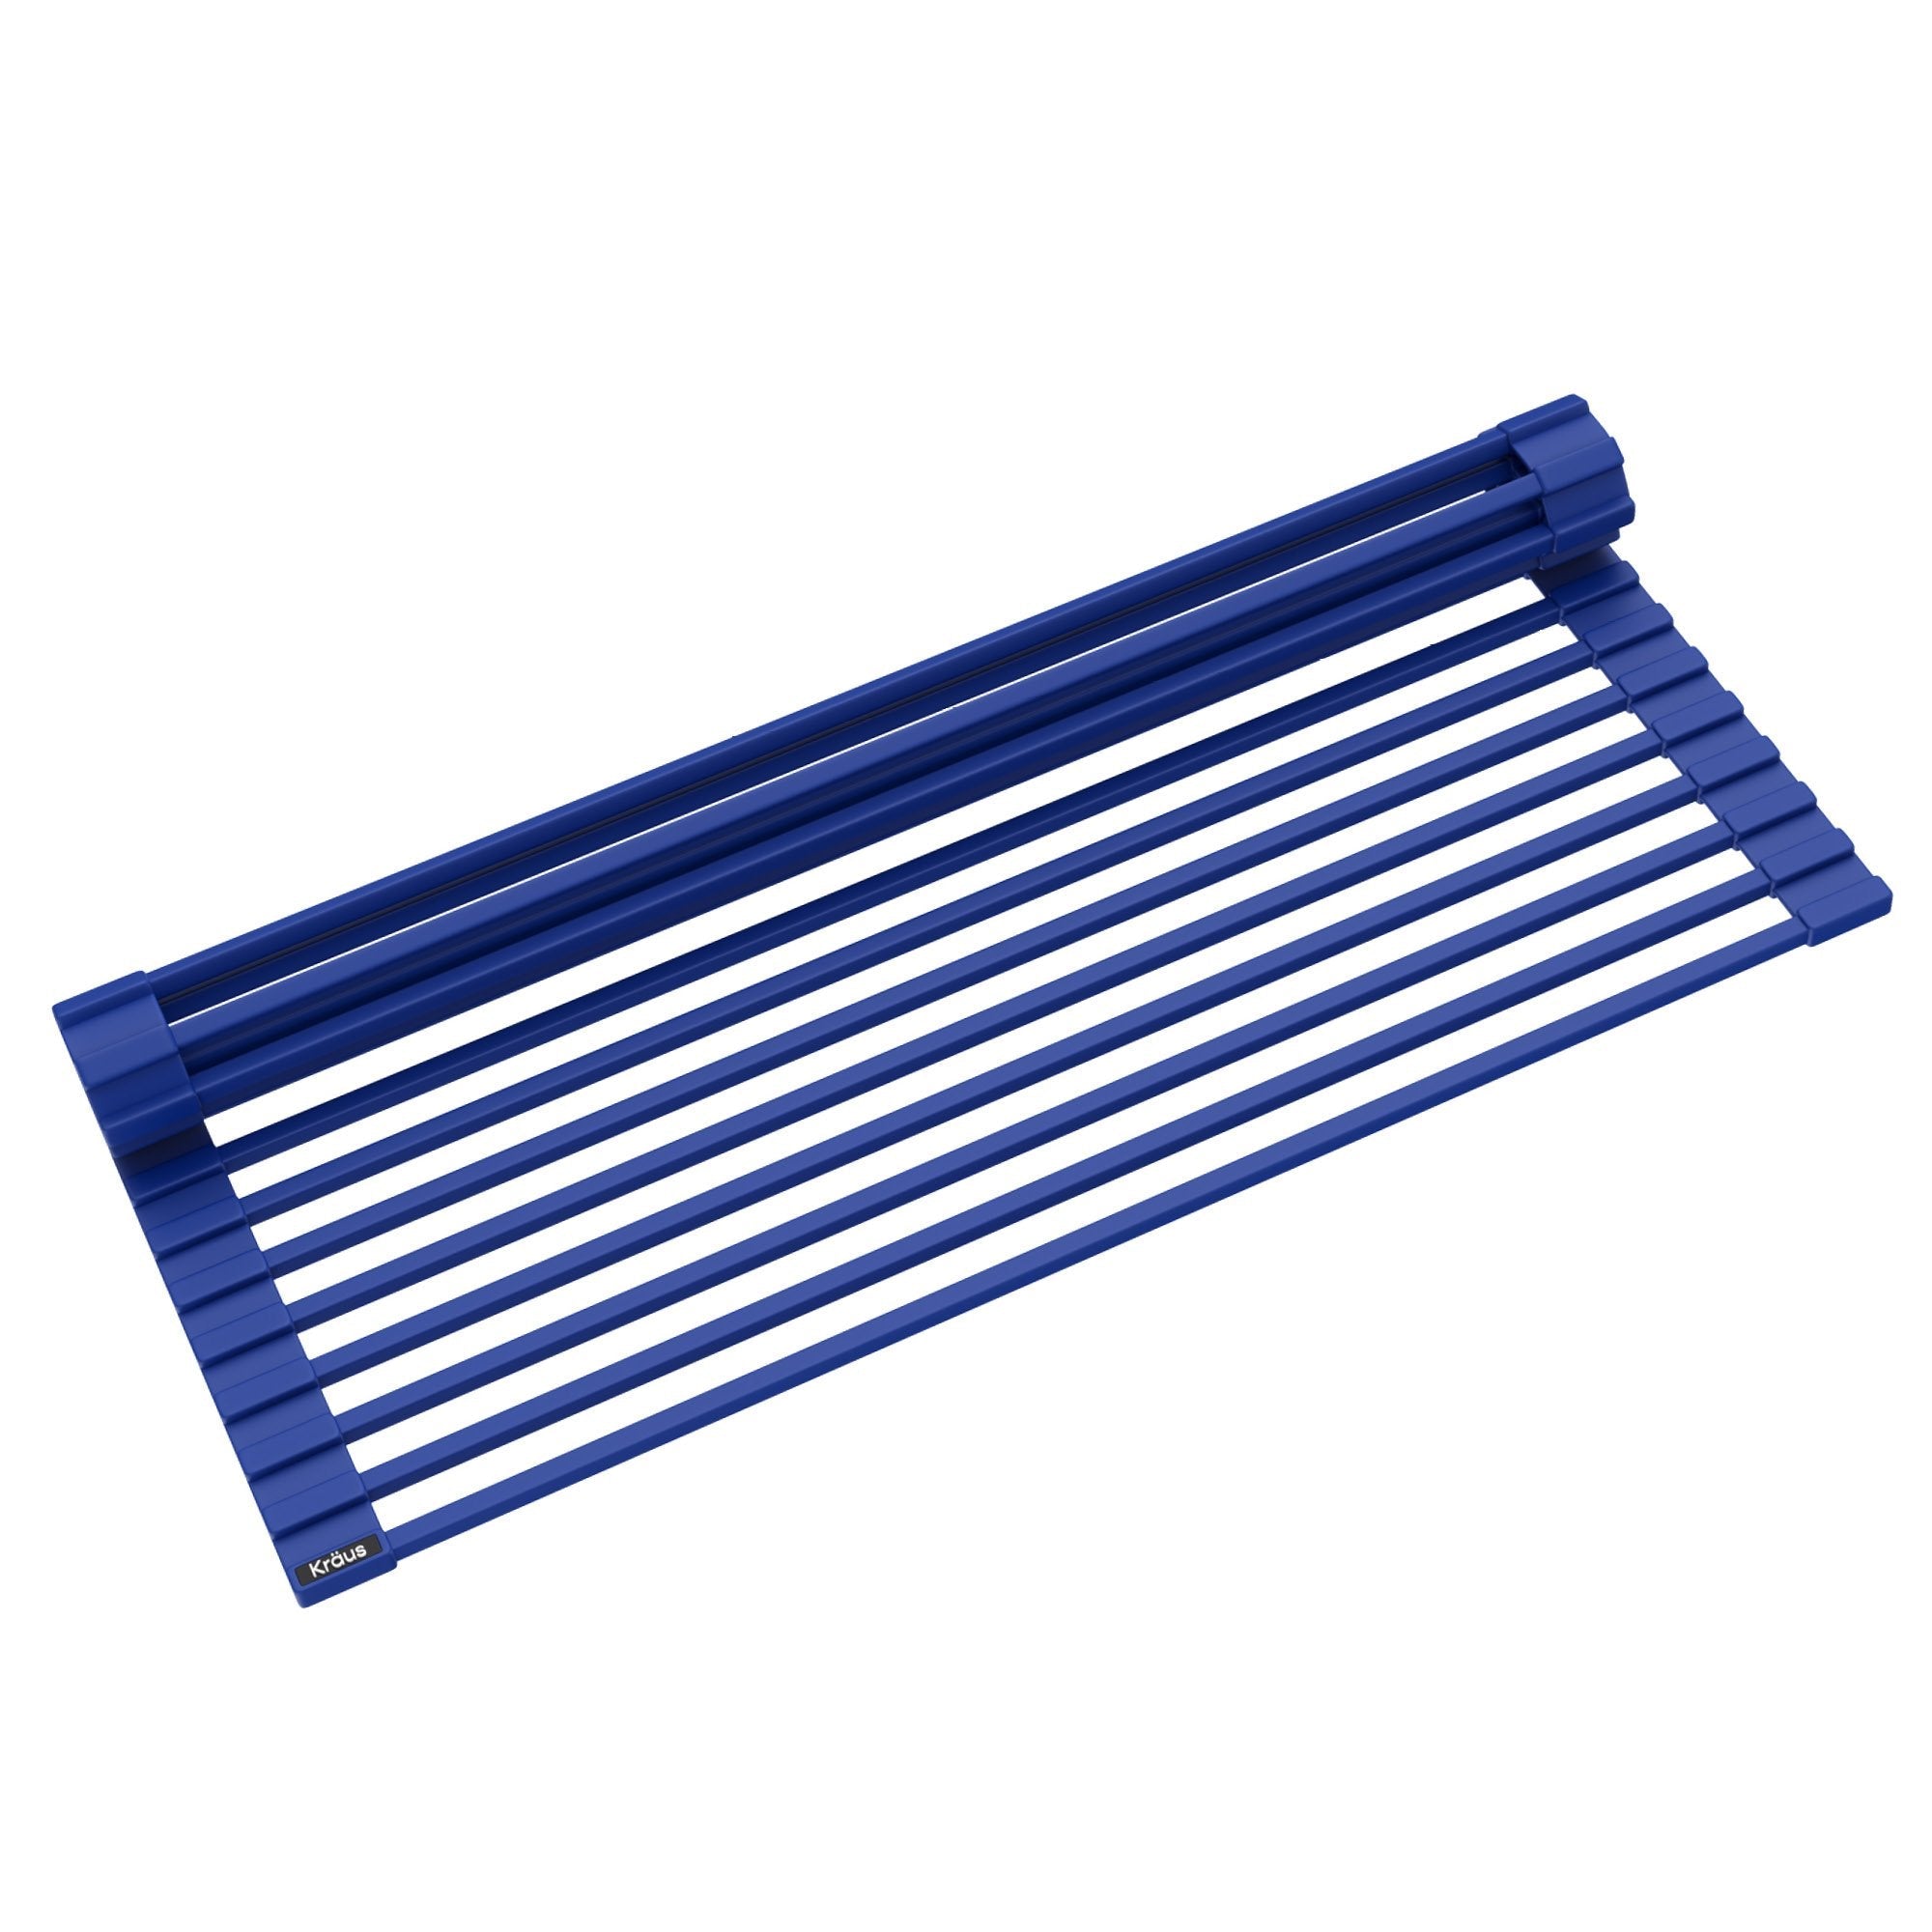 Kitchen Accessories Foldable Dish Drying Rack Drainer Over Sink